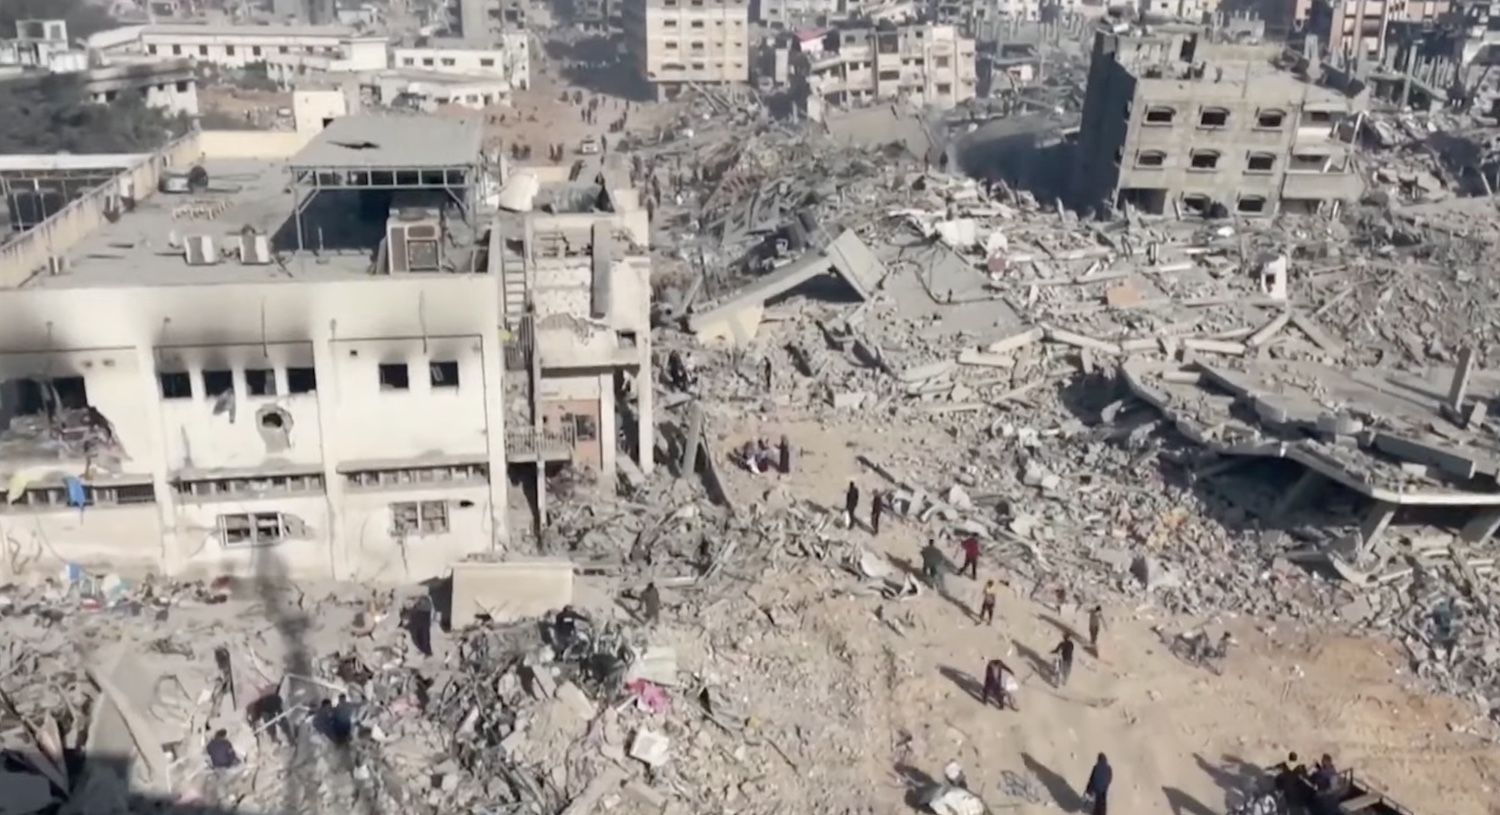 WASTELAND: Gaza reduced to rubble by Israeli forces